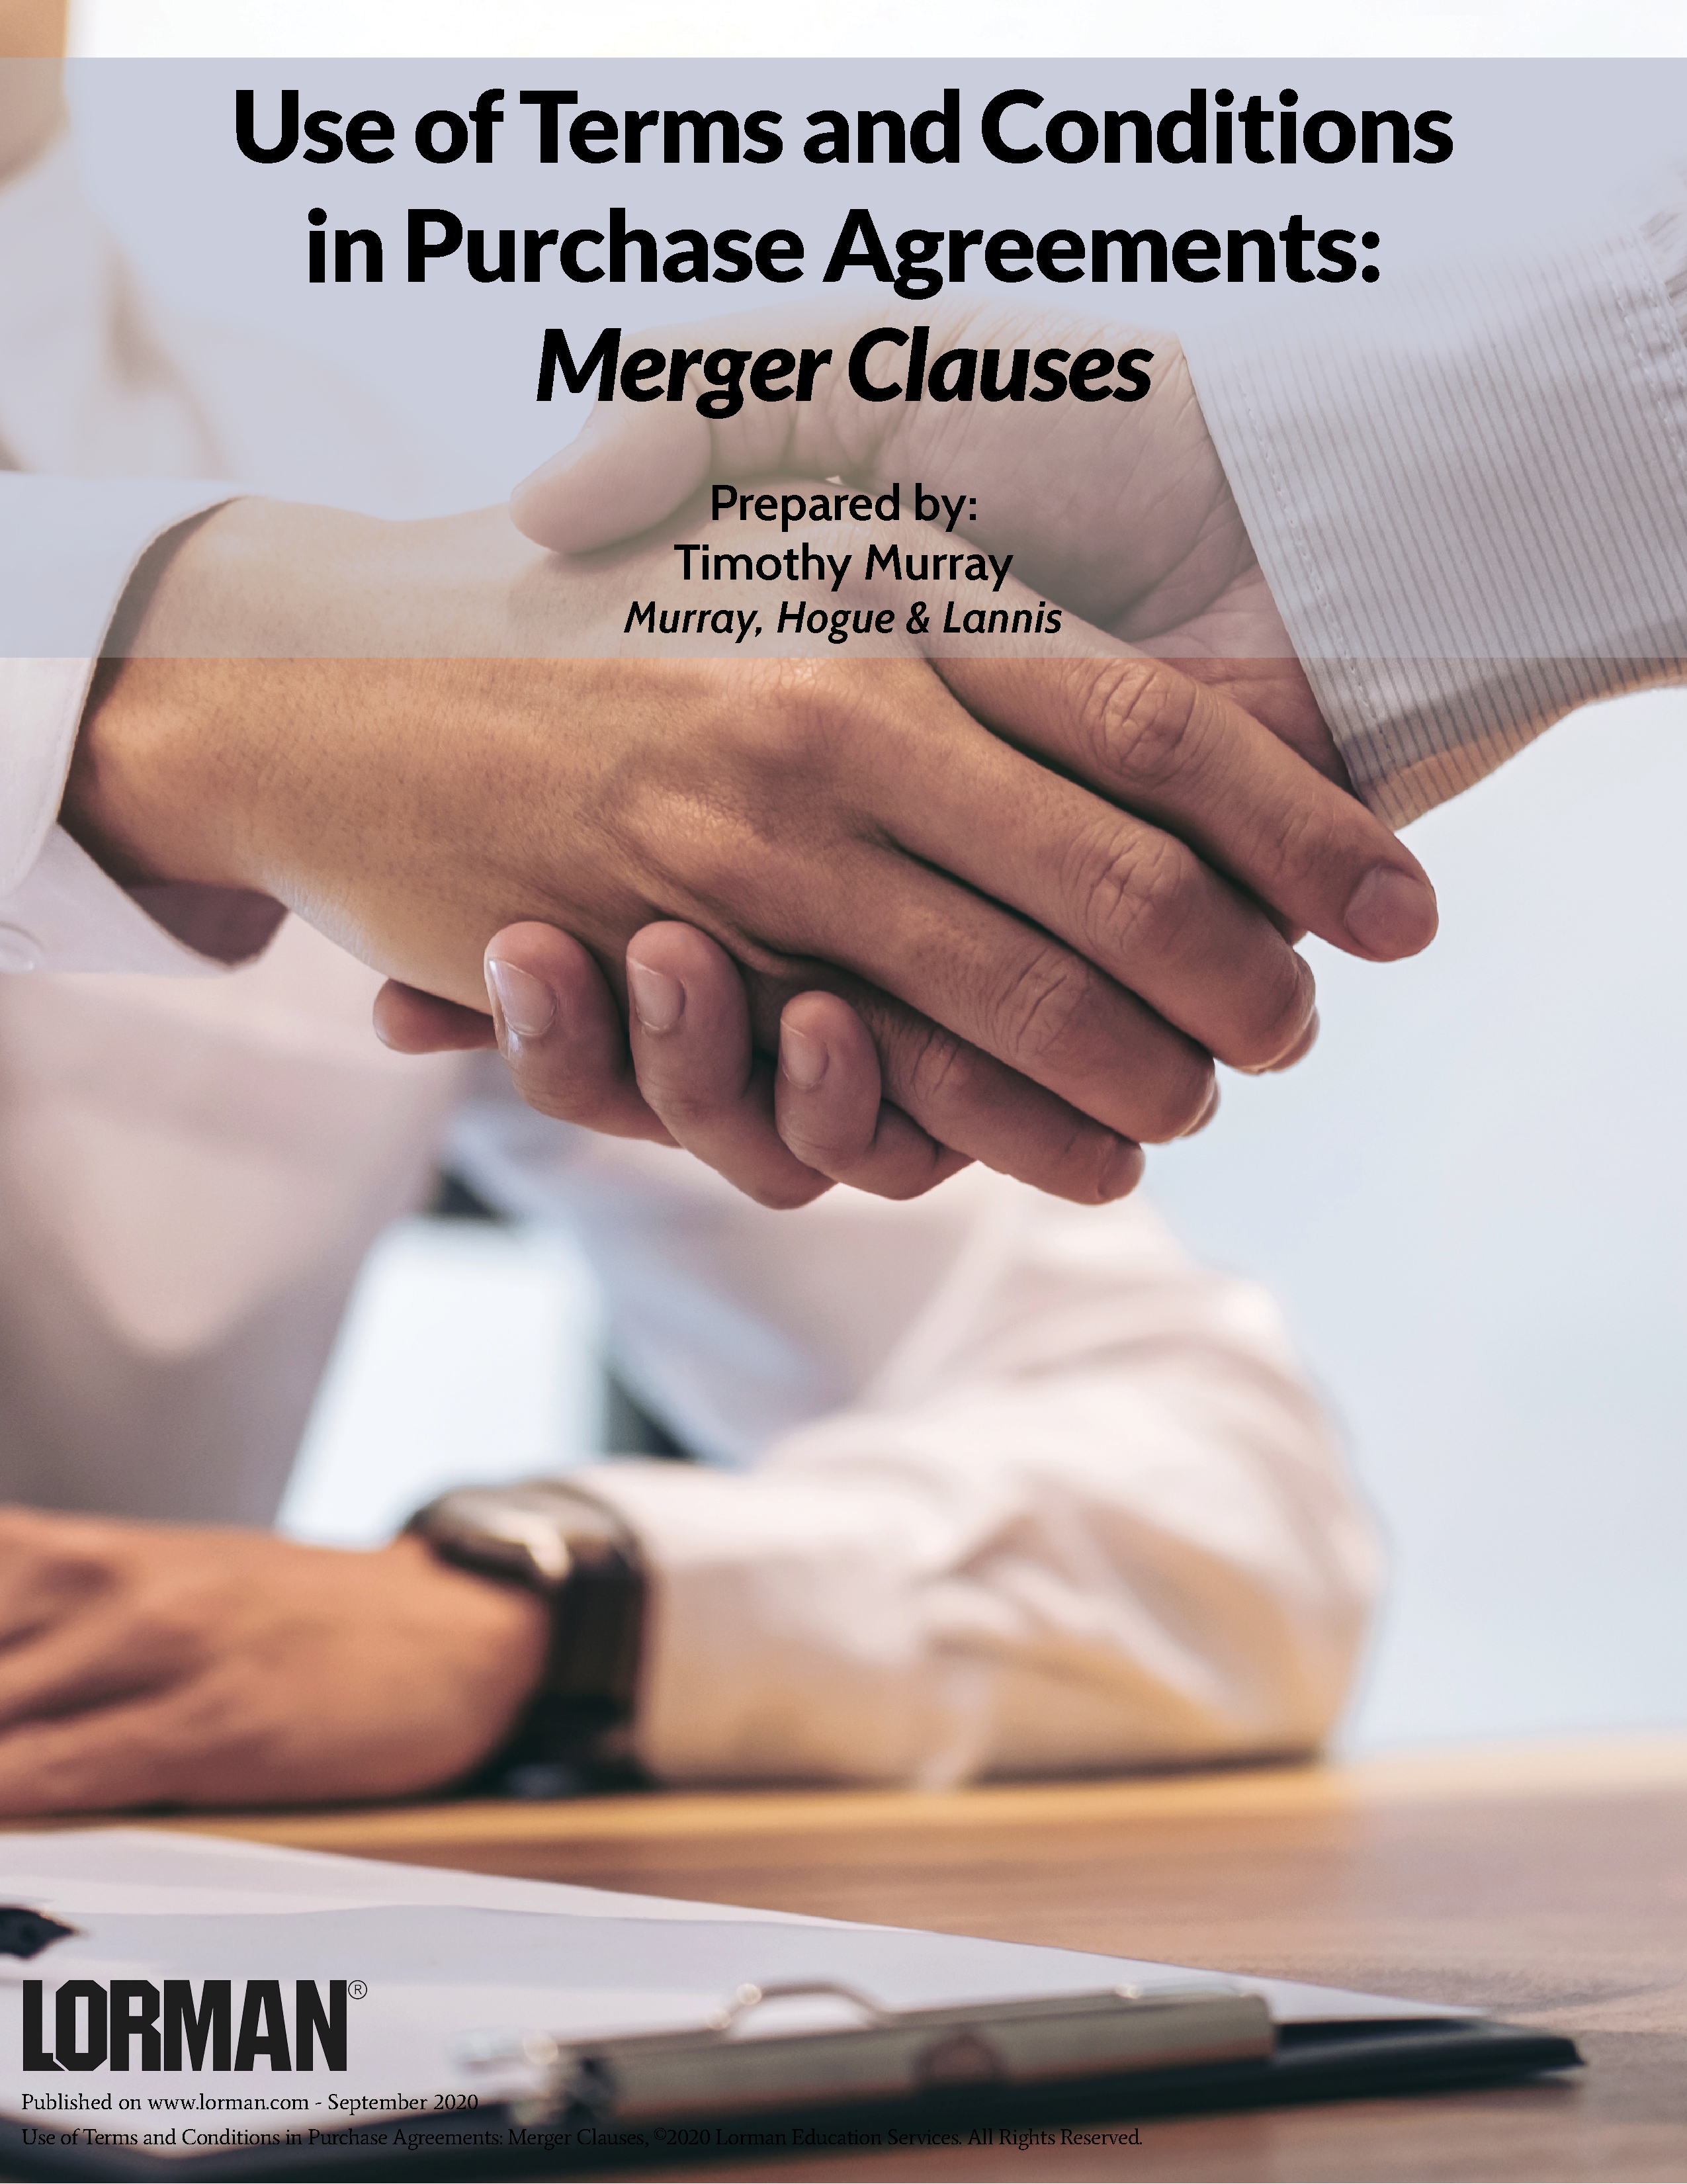 Use of Terms and Conditions in Purchase Agreements: Merger Clauses